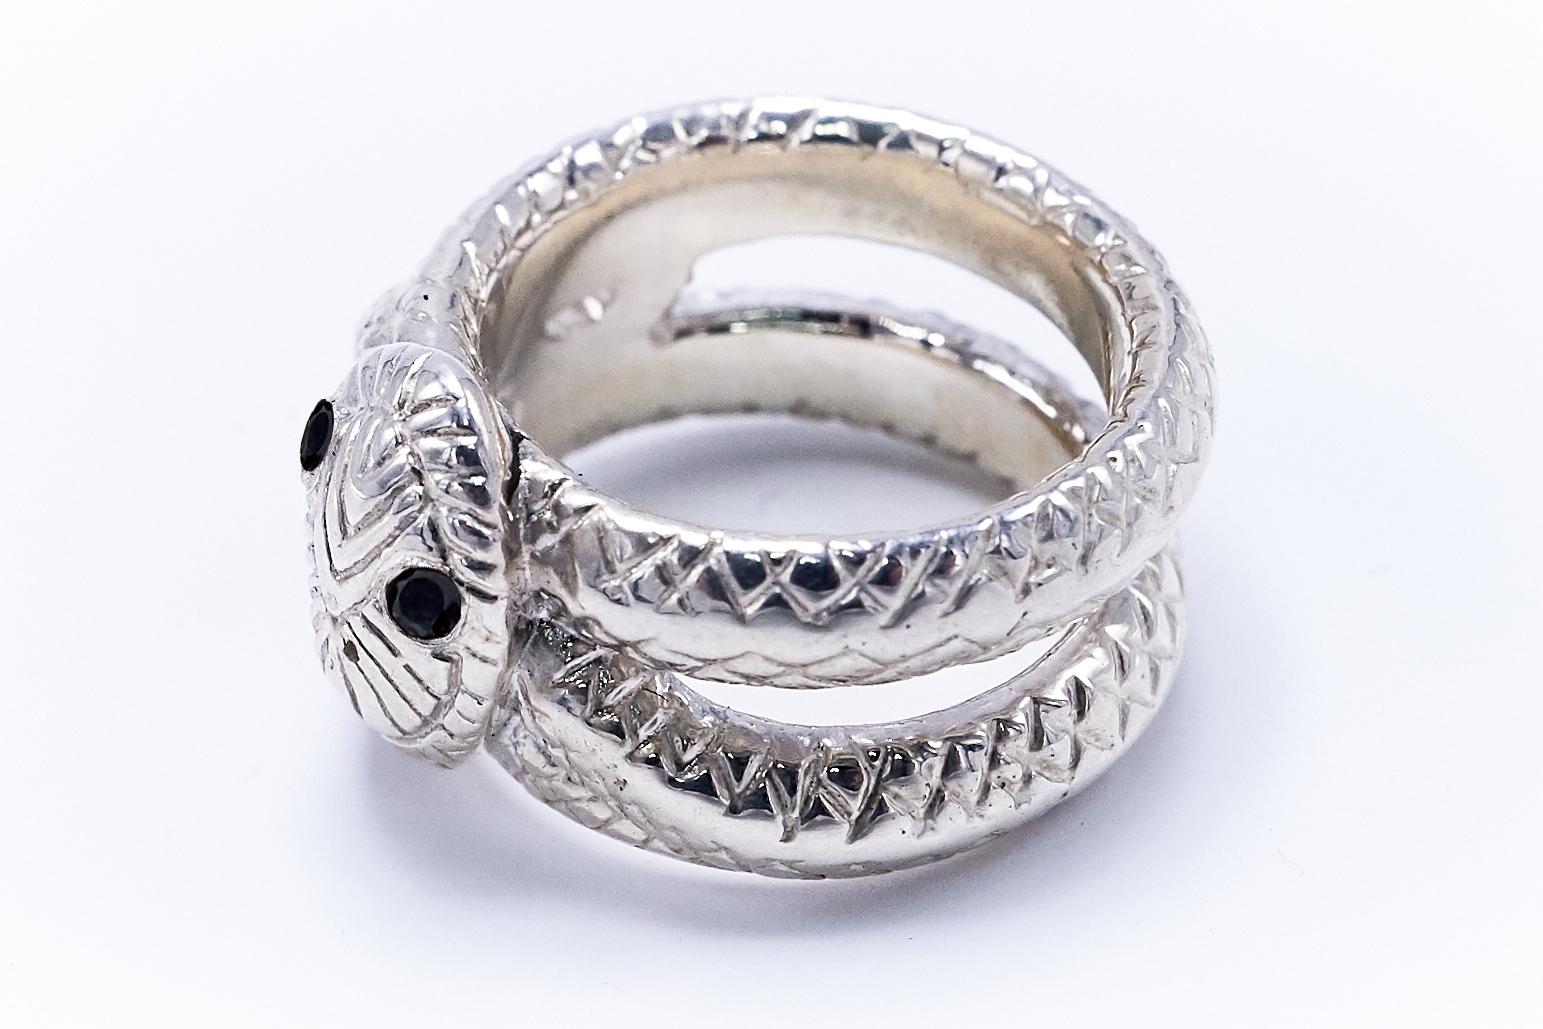 Black Diamond White Gold Victorian Style Snake Ring Silver Cocktail Ring J Dauphin

J DAUPHIN 